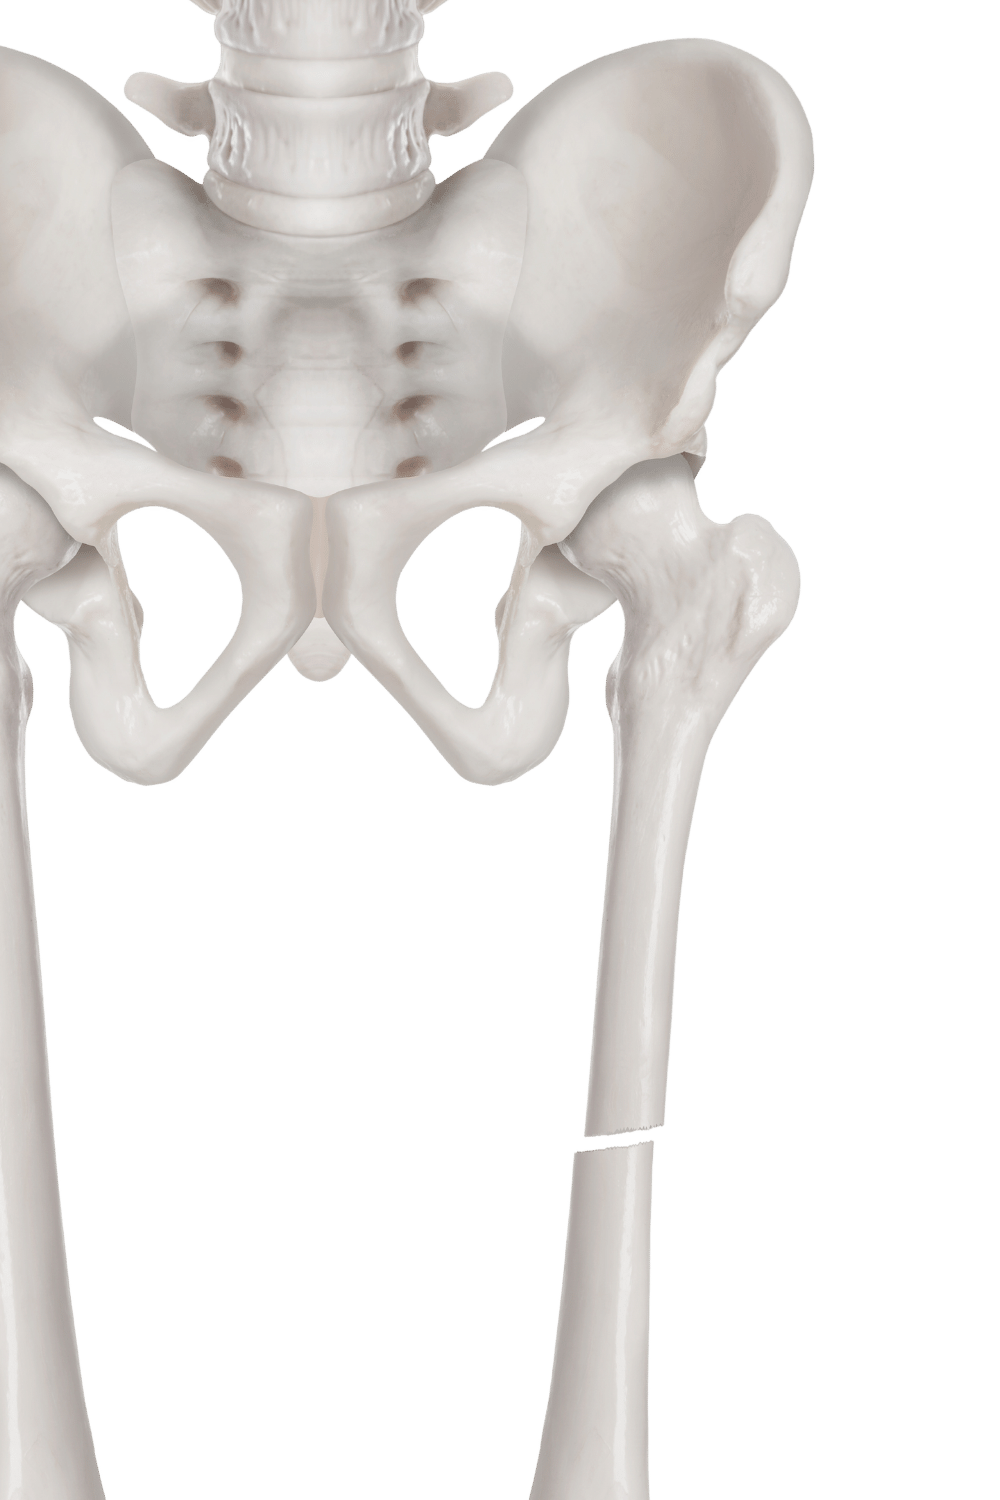 total hip replacement surgery center dallas